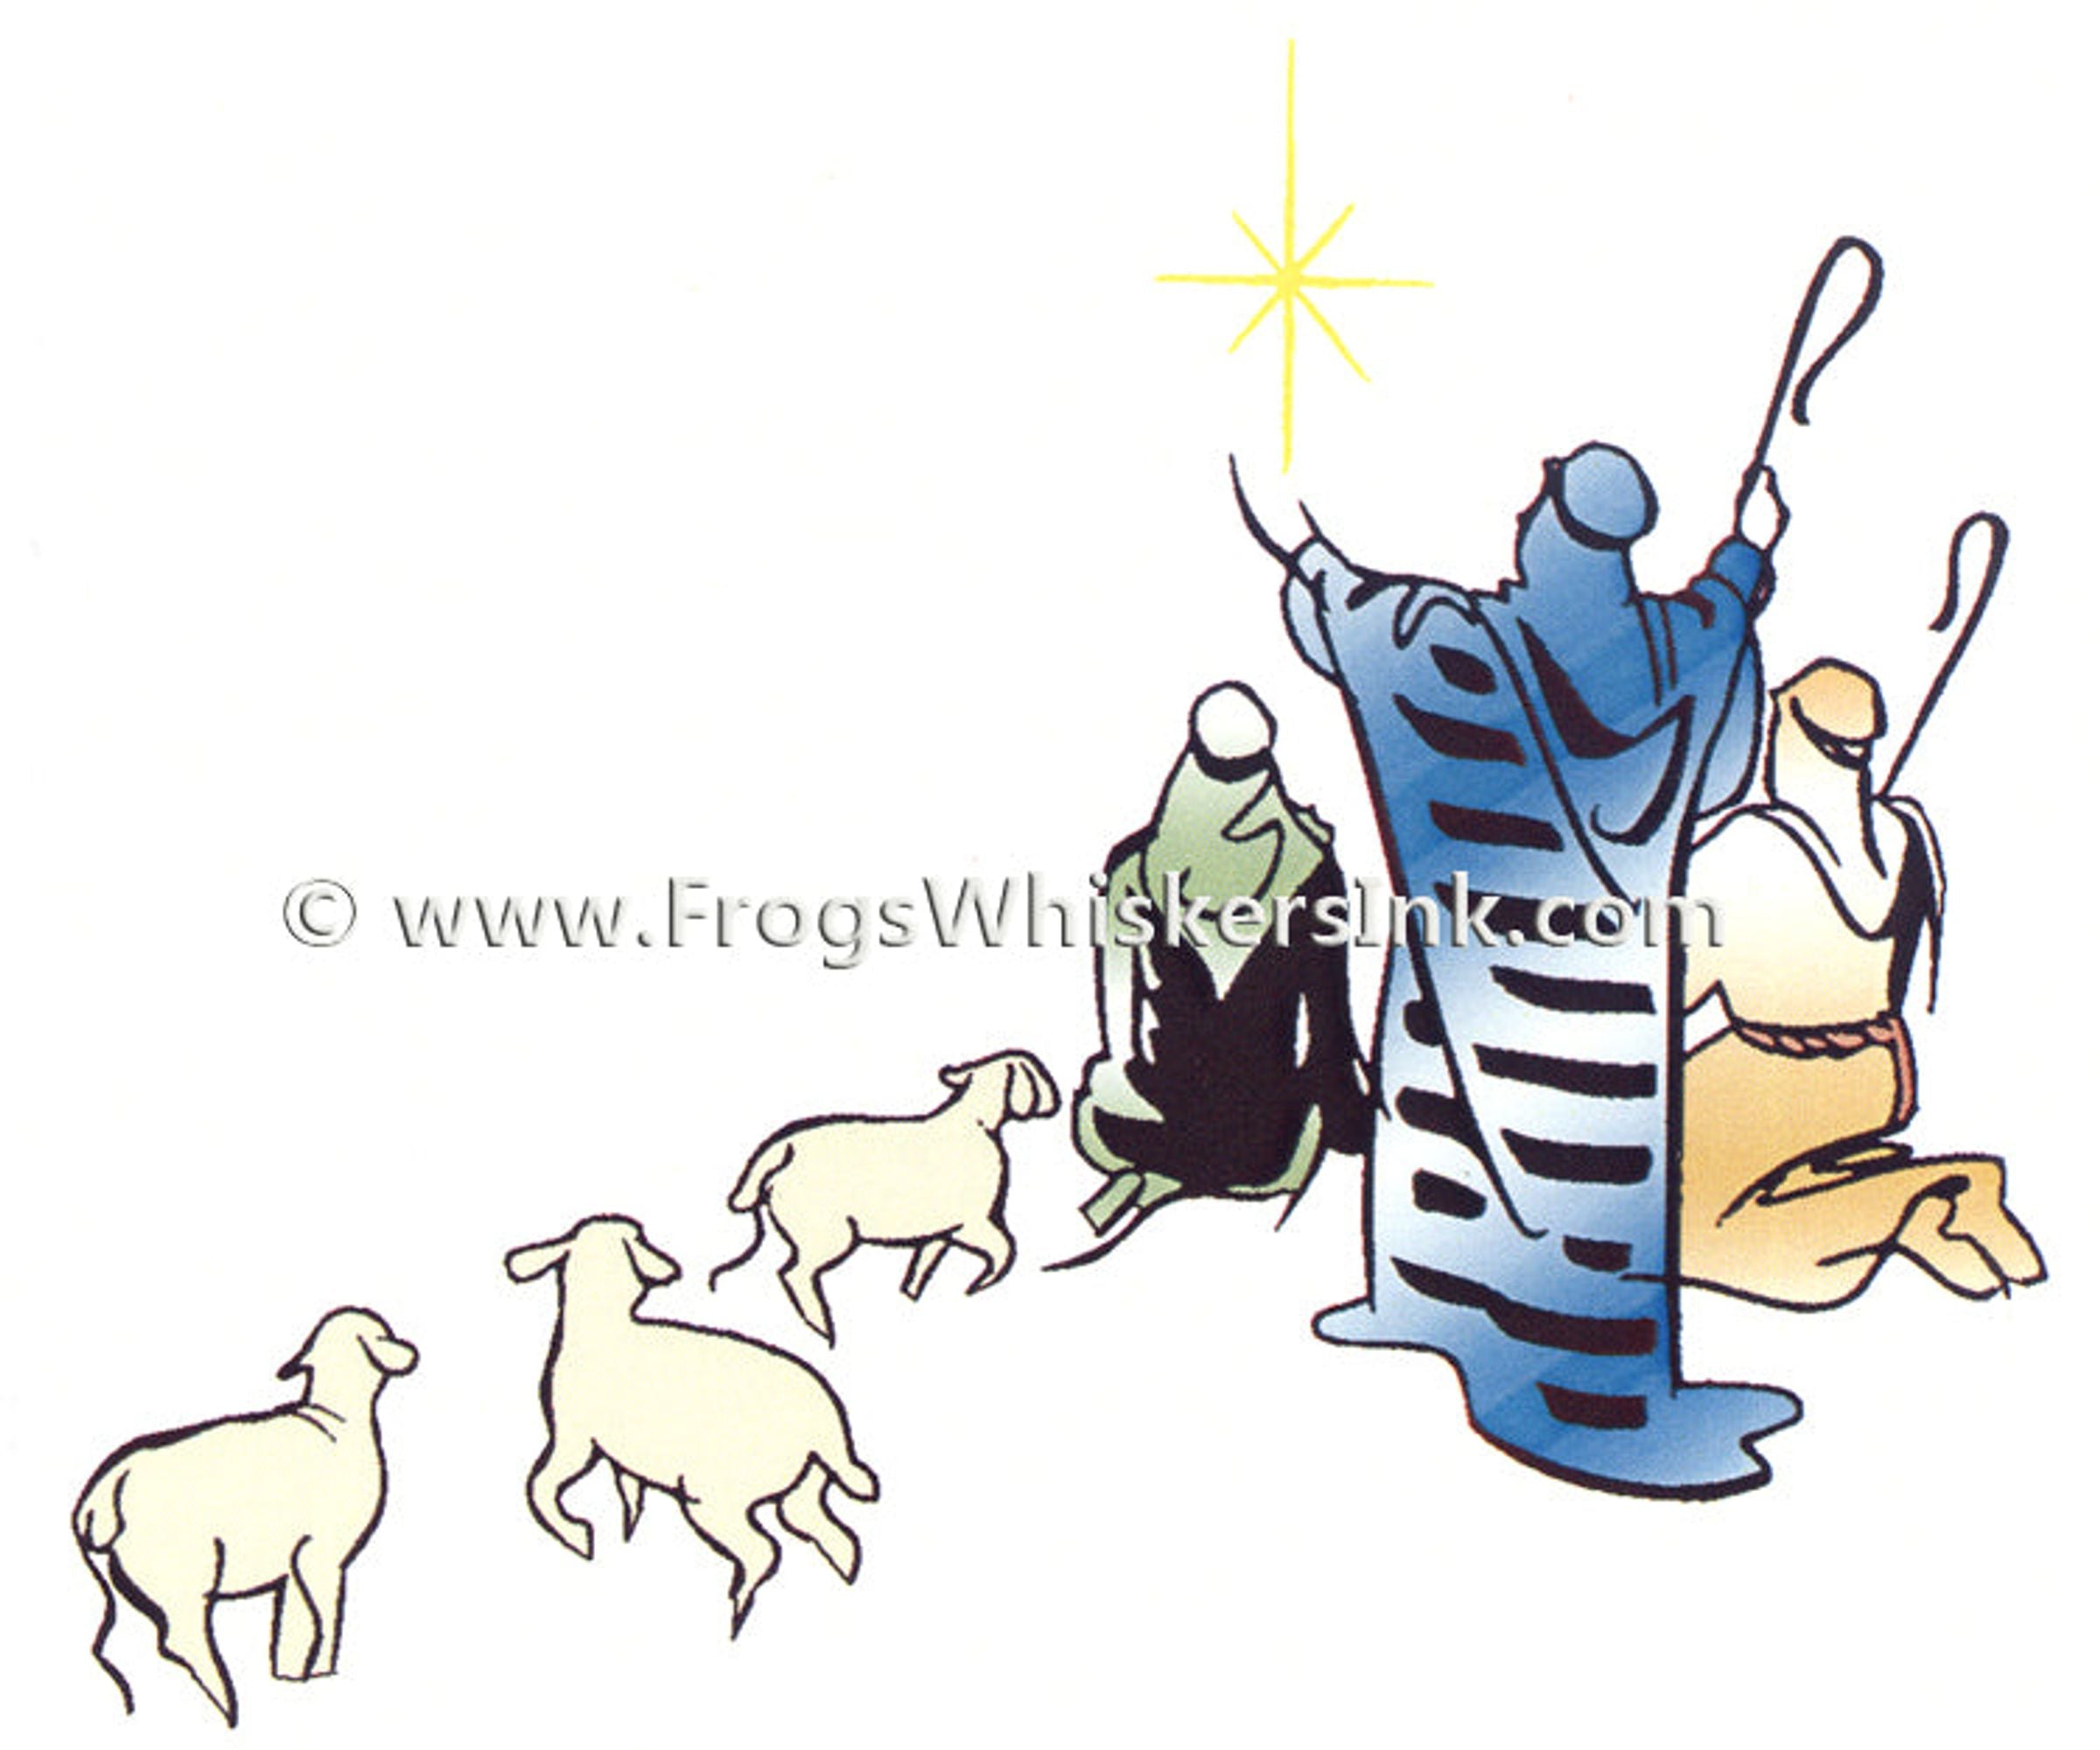 Frog's Whiskers Ink Stamps - Shepherds Watching